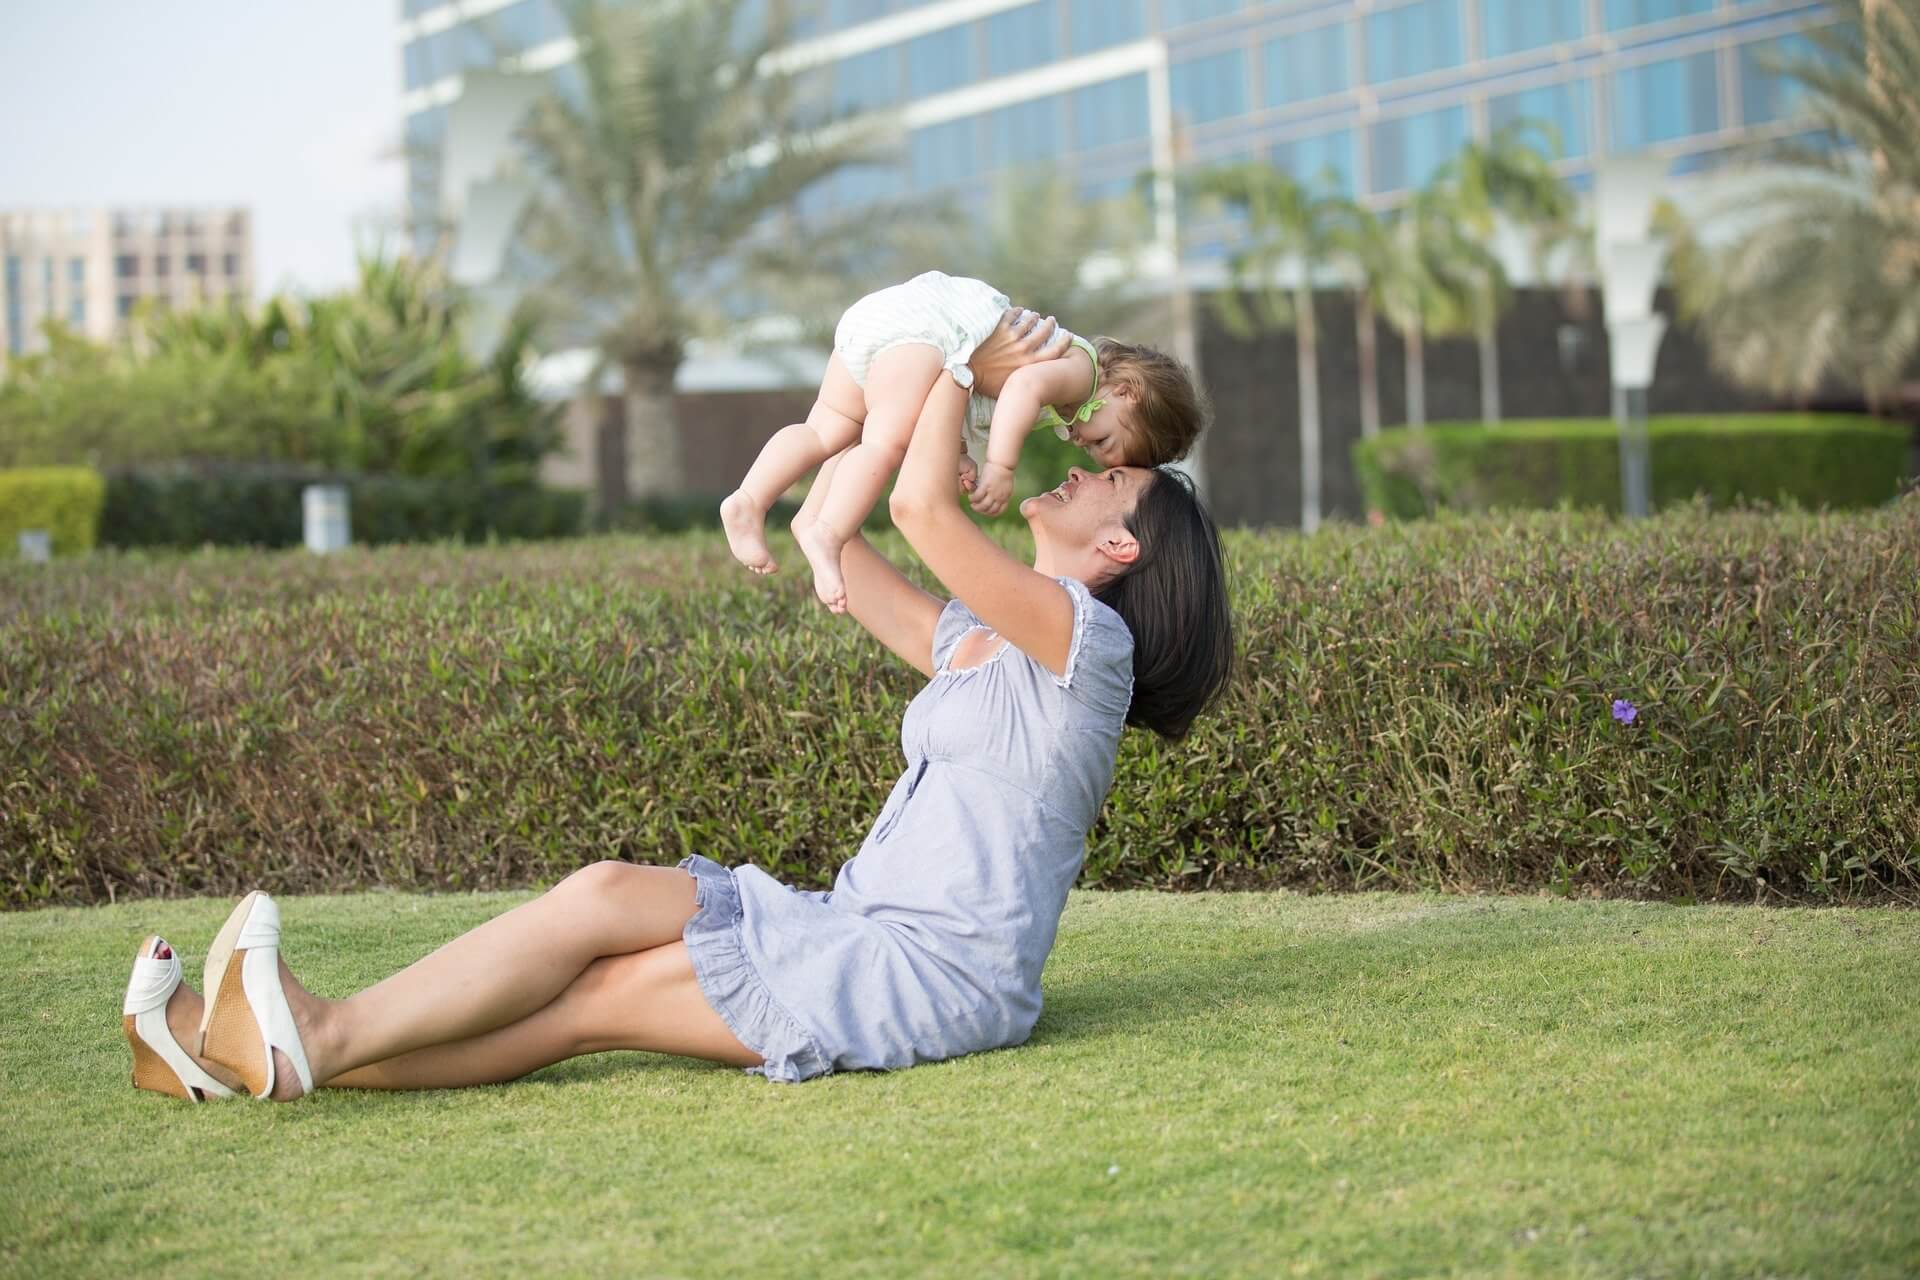 A other sitting in the grass lifting her baby in the air.